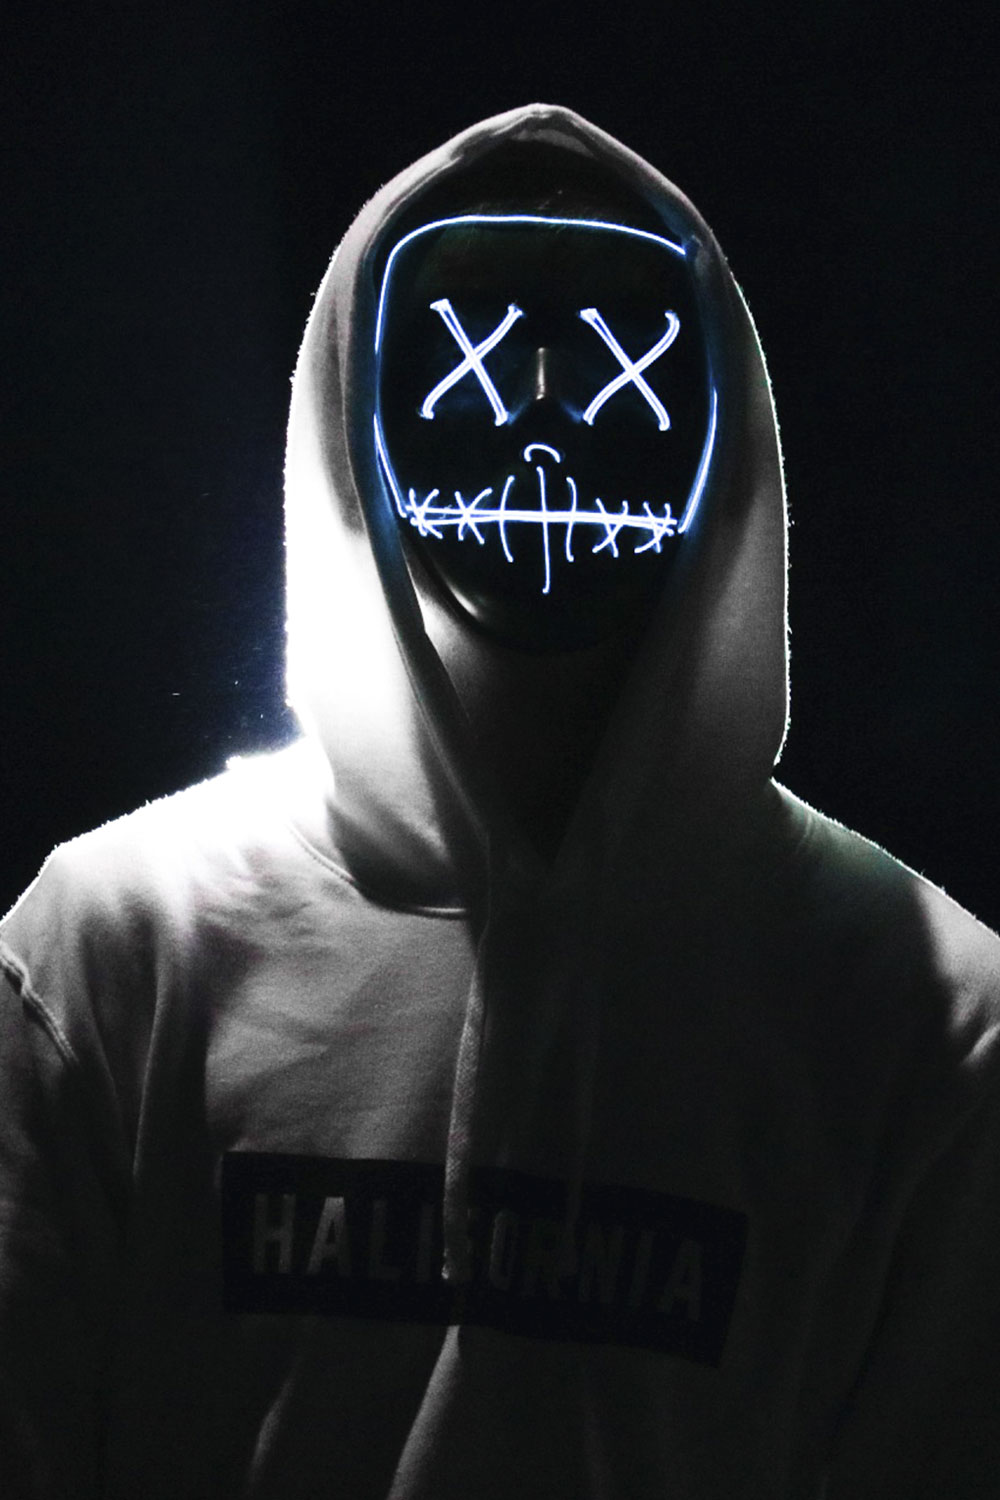 photograph of a person with glowing crosses for eyes and a mouth